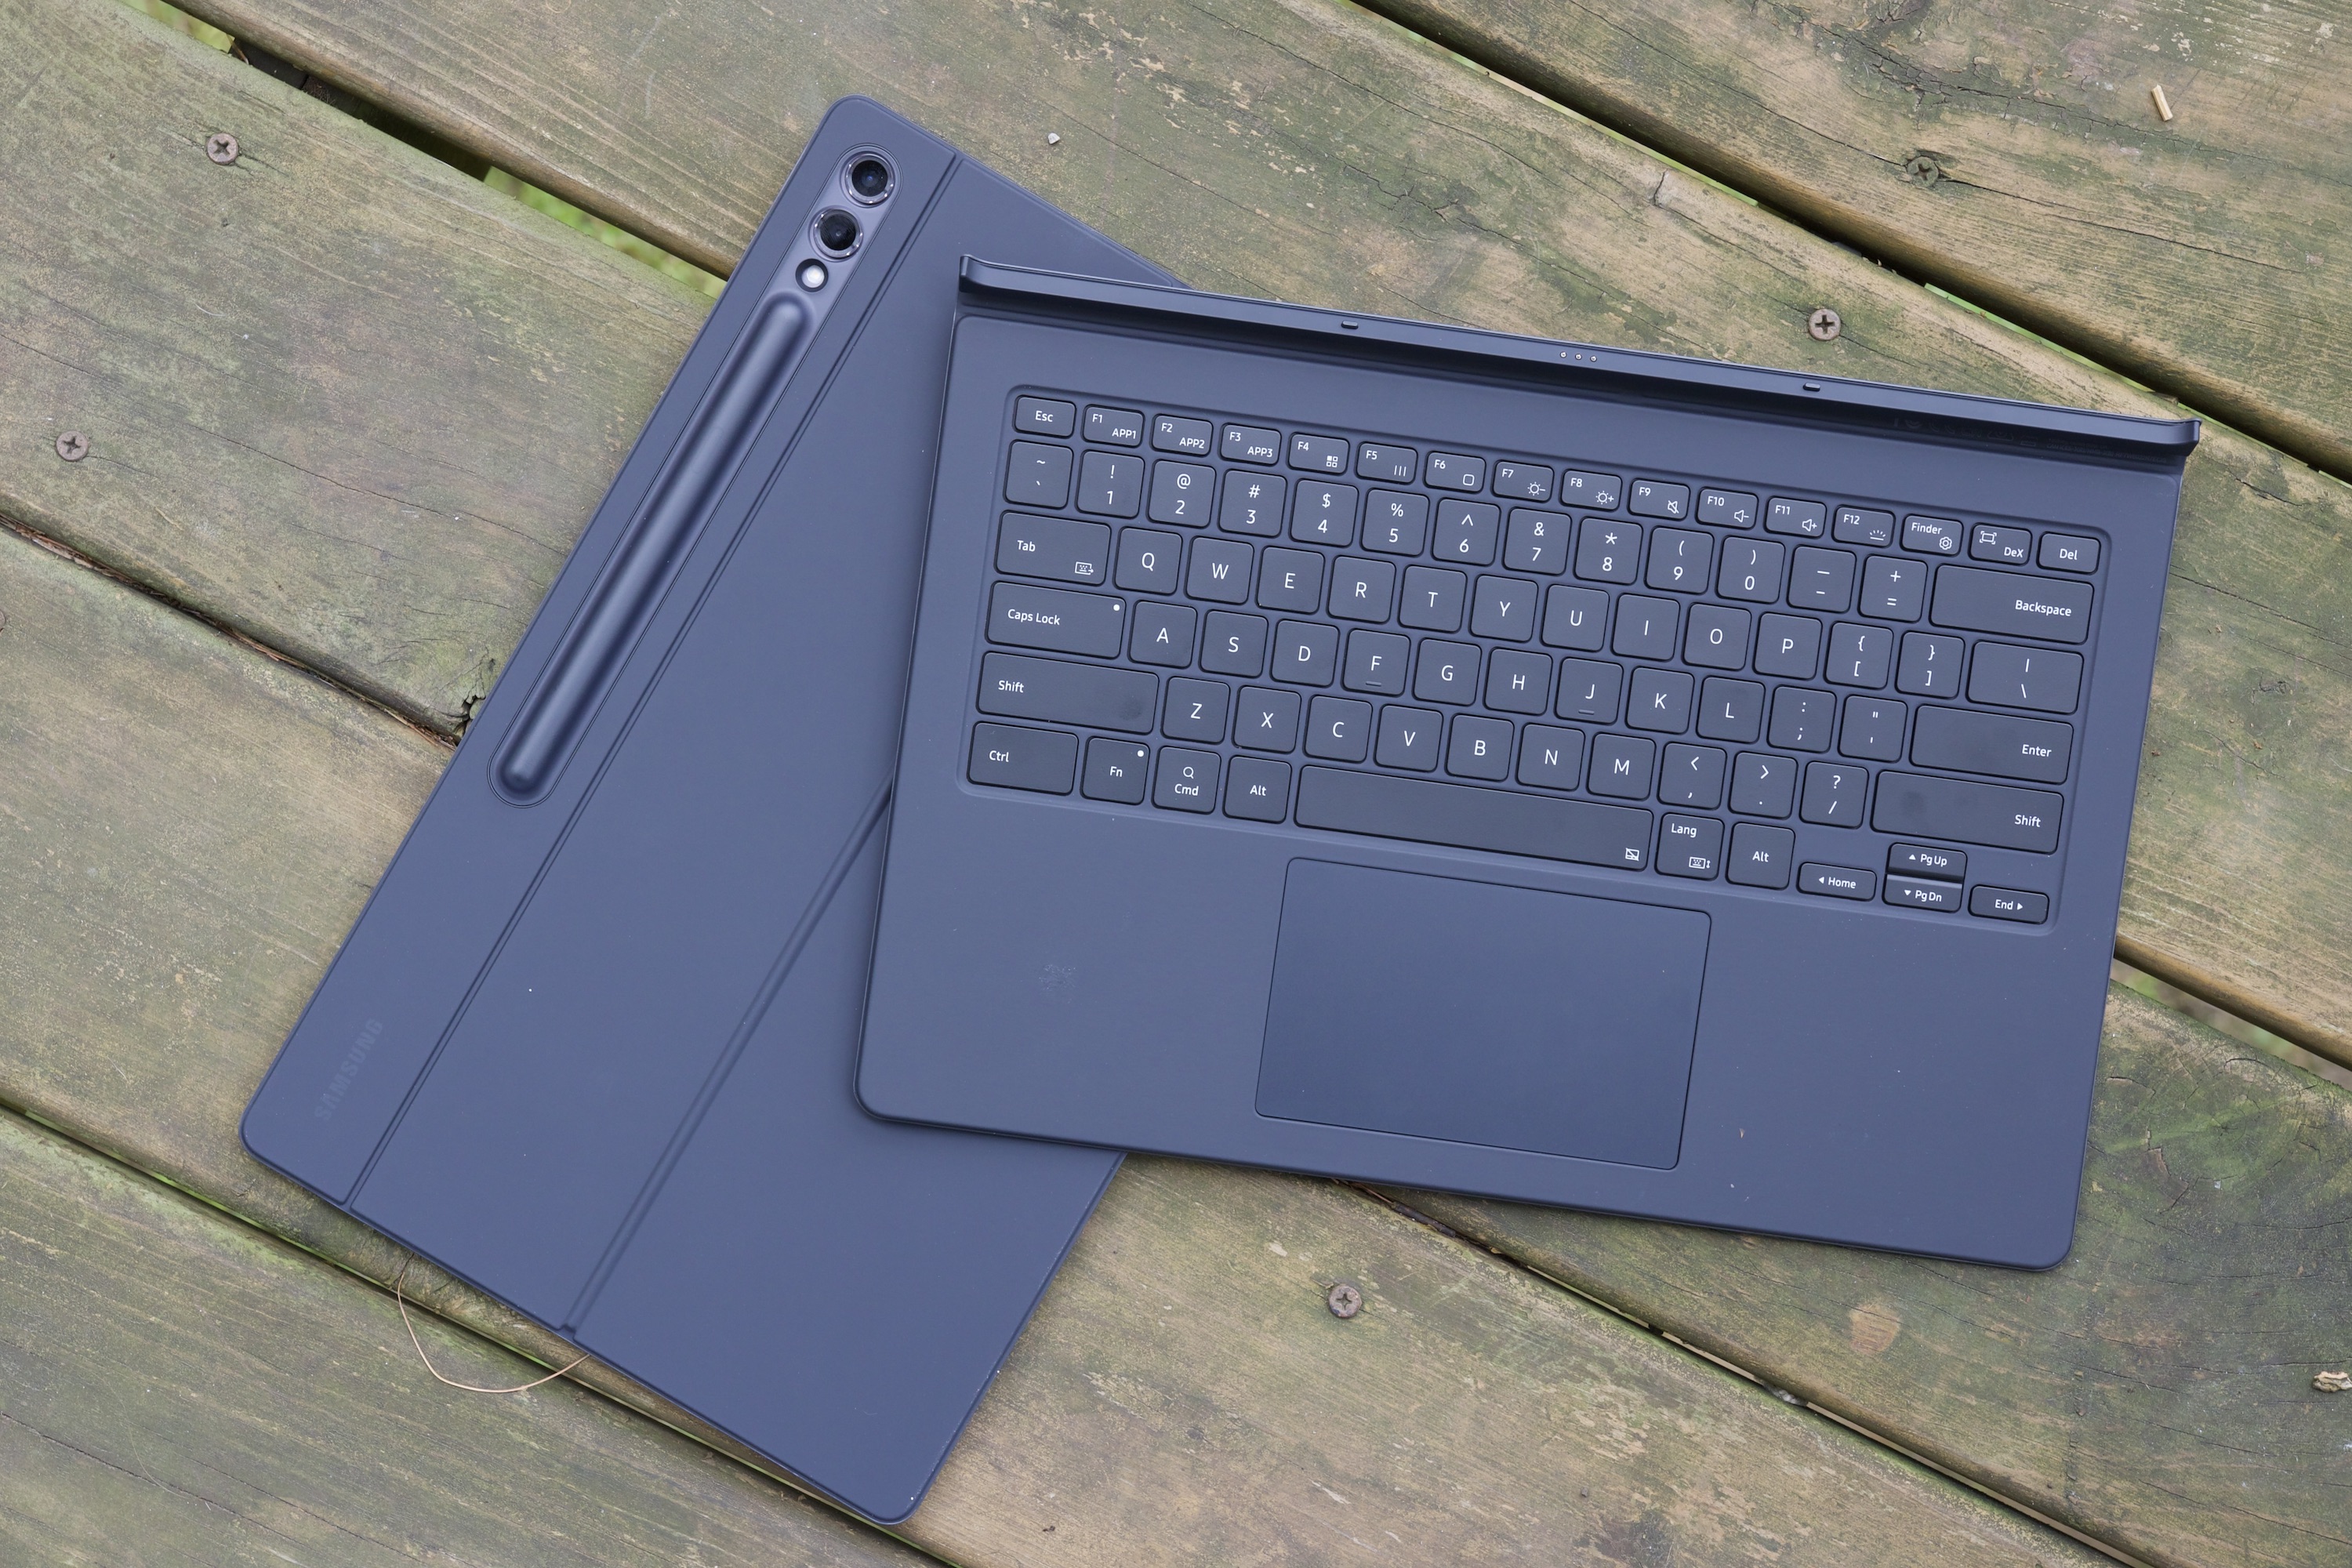 Keyboard case accessory for the Samsung Galaxy Tab S9 Ultra.